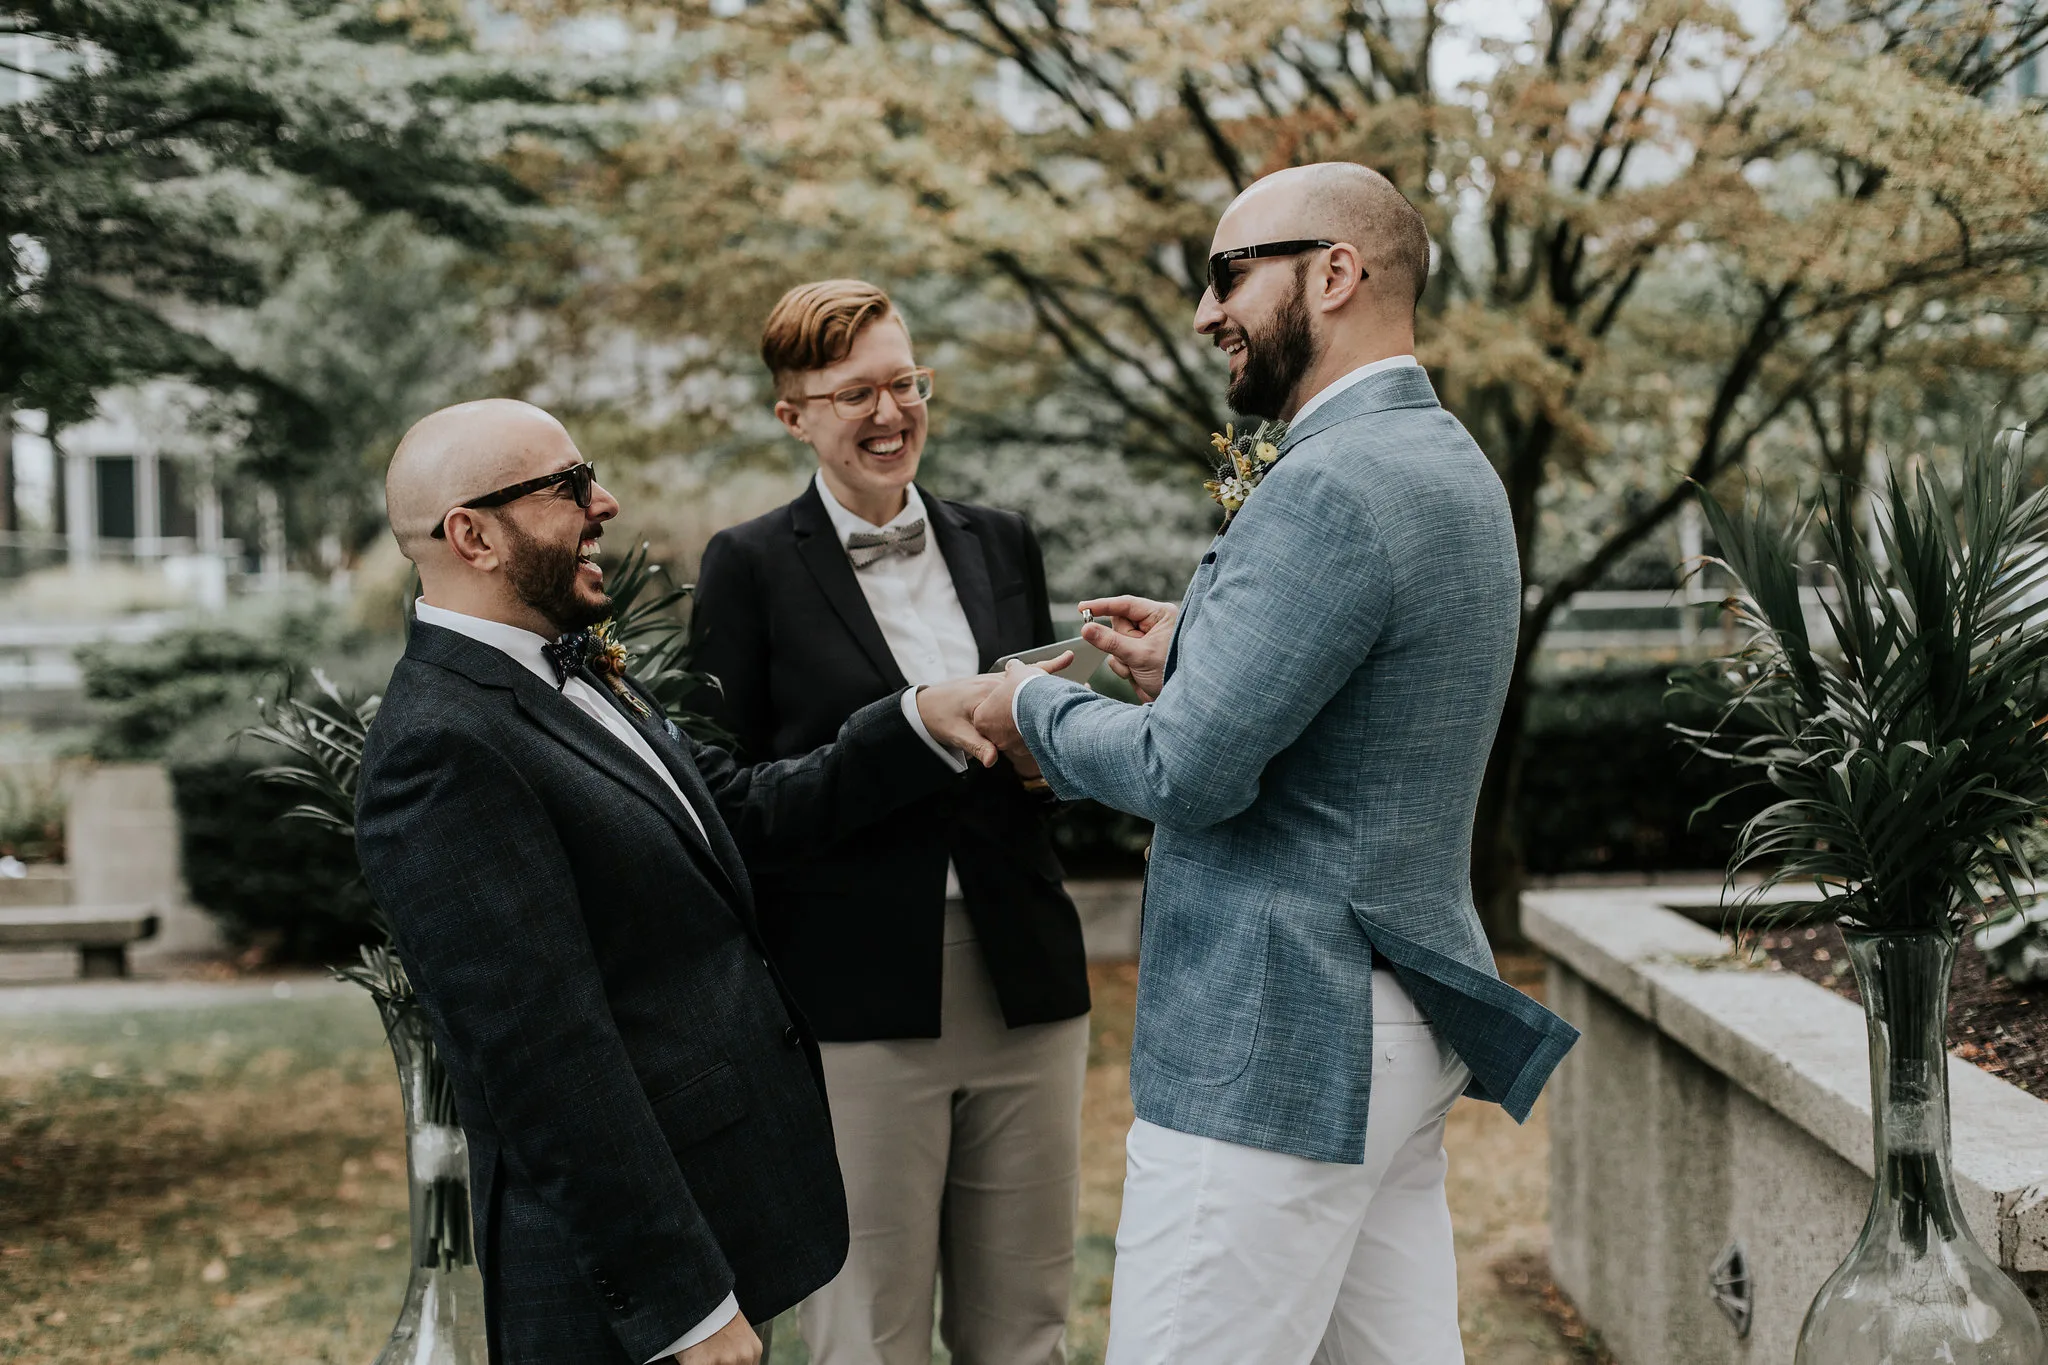 Two grooms smiling and laughing during their wedding ceremony with Young Hip & Married Officiant Beth